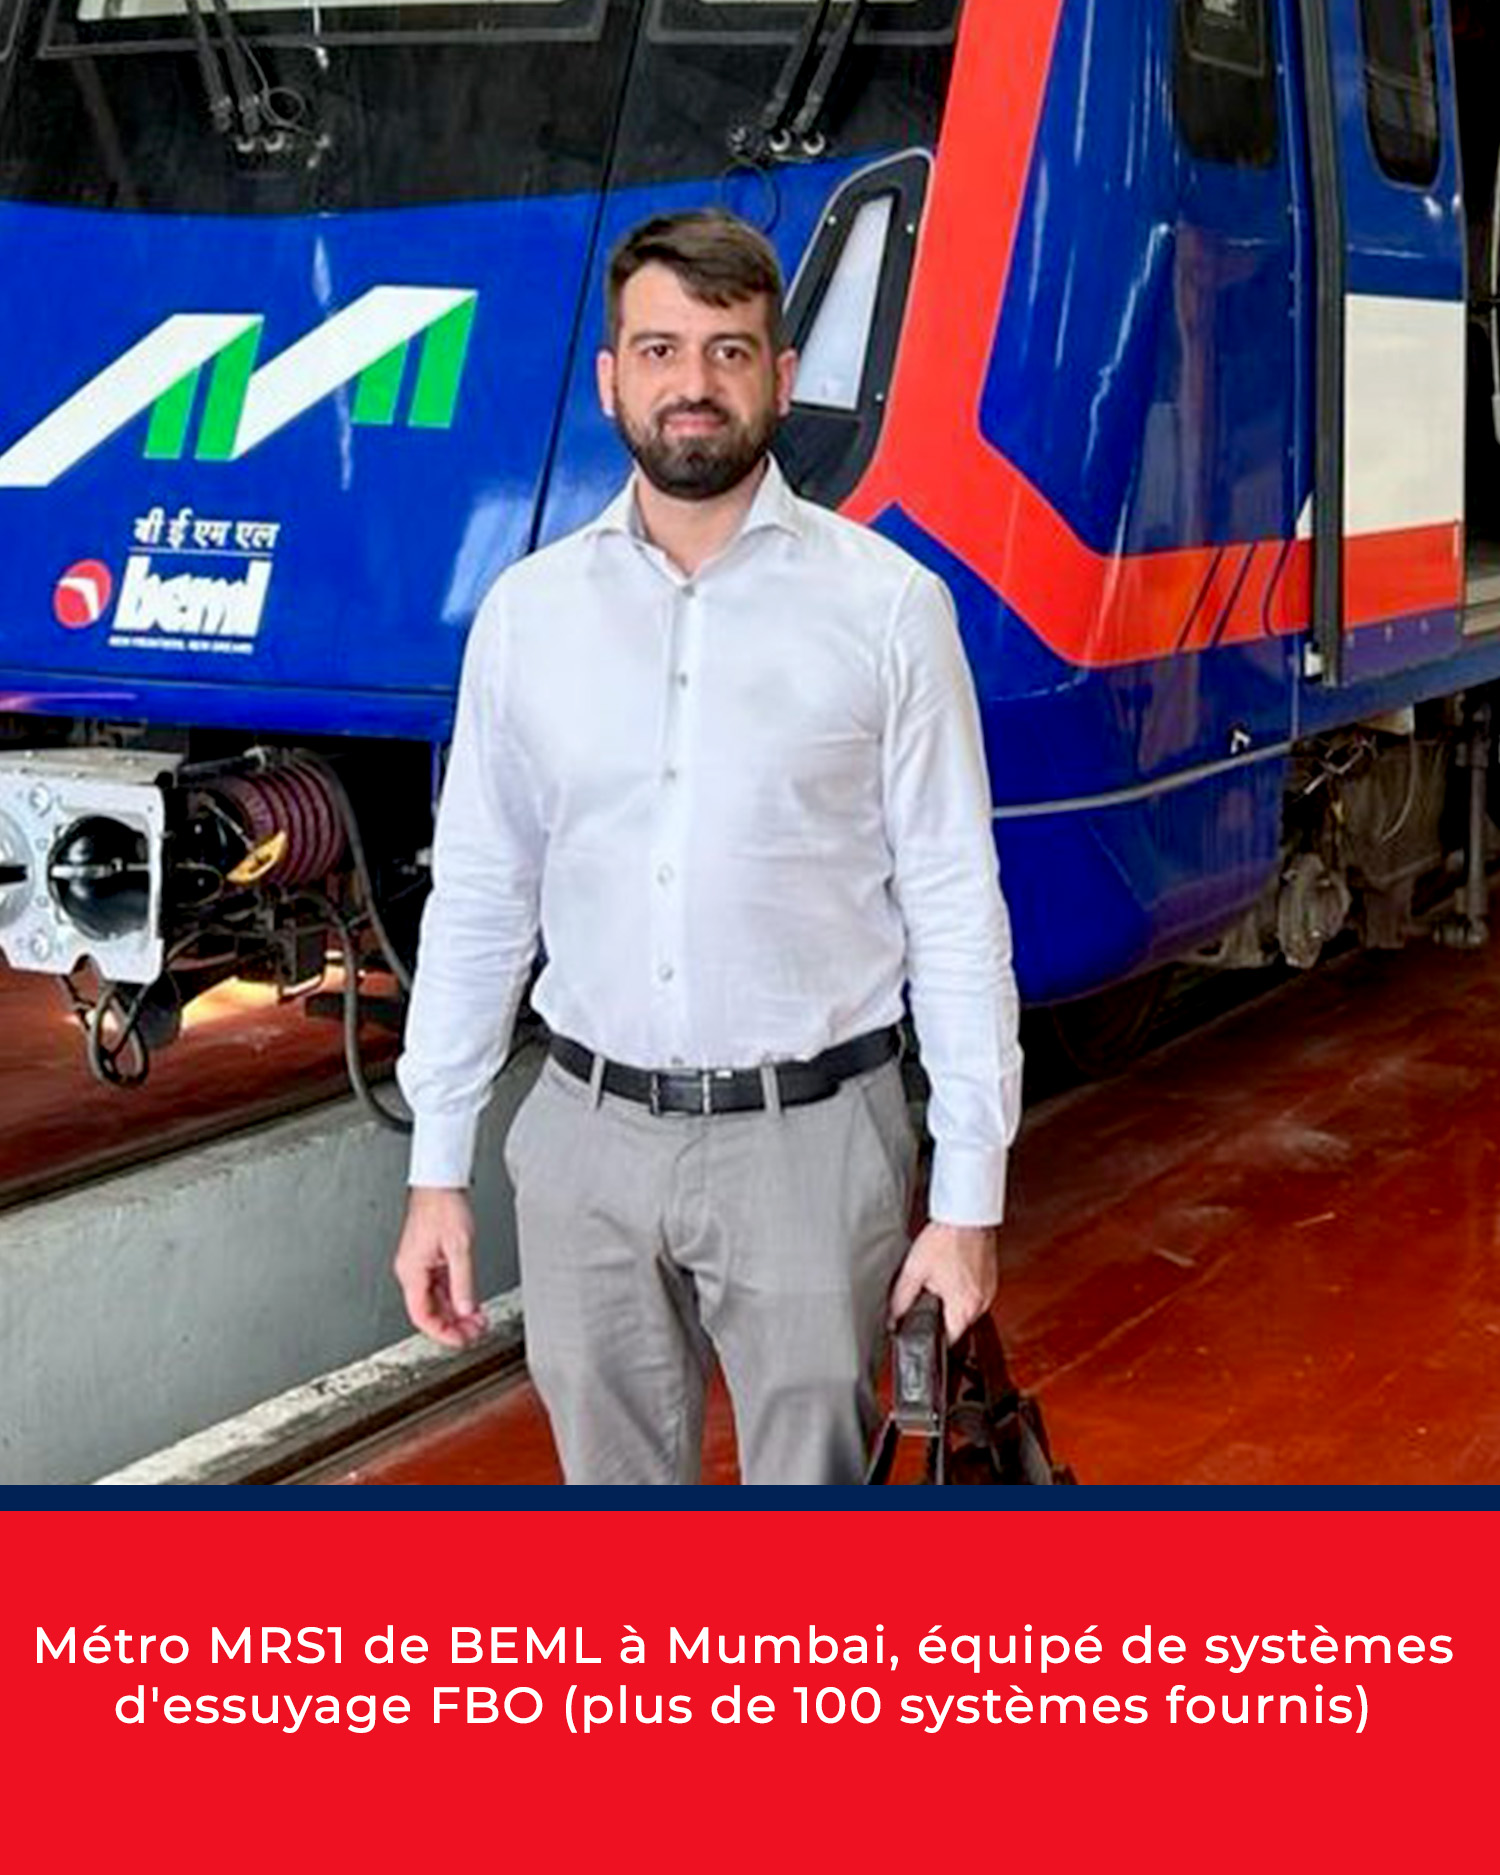 UJA | BEML’s MRS1 Metro in Mumbai, geared with FBO wiper systems (More than 100 systems supplied)